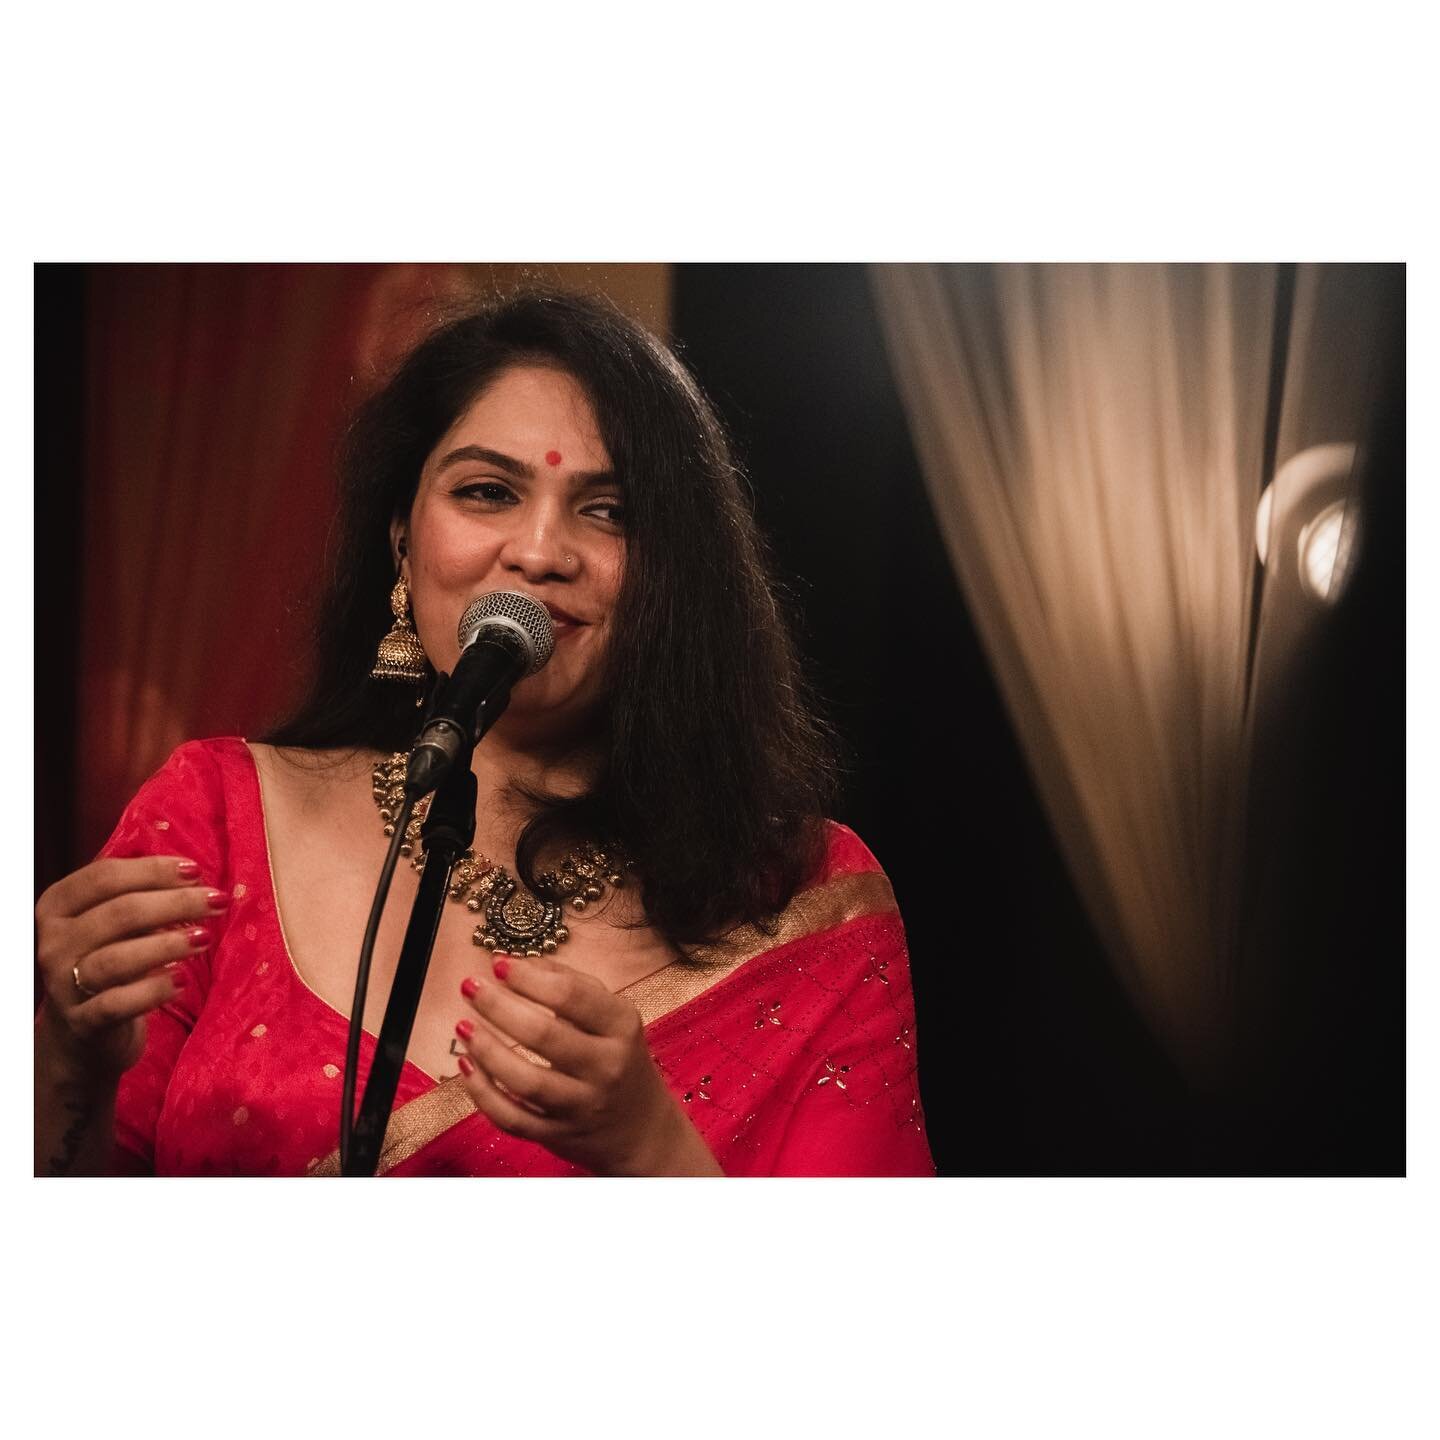 Isheeta&rsquo;s debut EP, Ek Sutra, released today. I was blessed enough to attend a concert where she performed the songs in it. I was also blessed &ndash; in a much larger way &ndash; to be her student and learn how to sing from her. Everyone who r